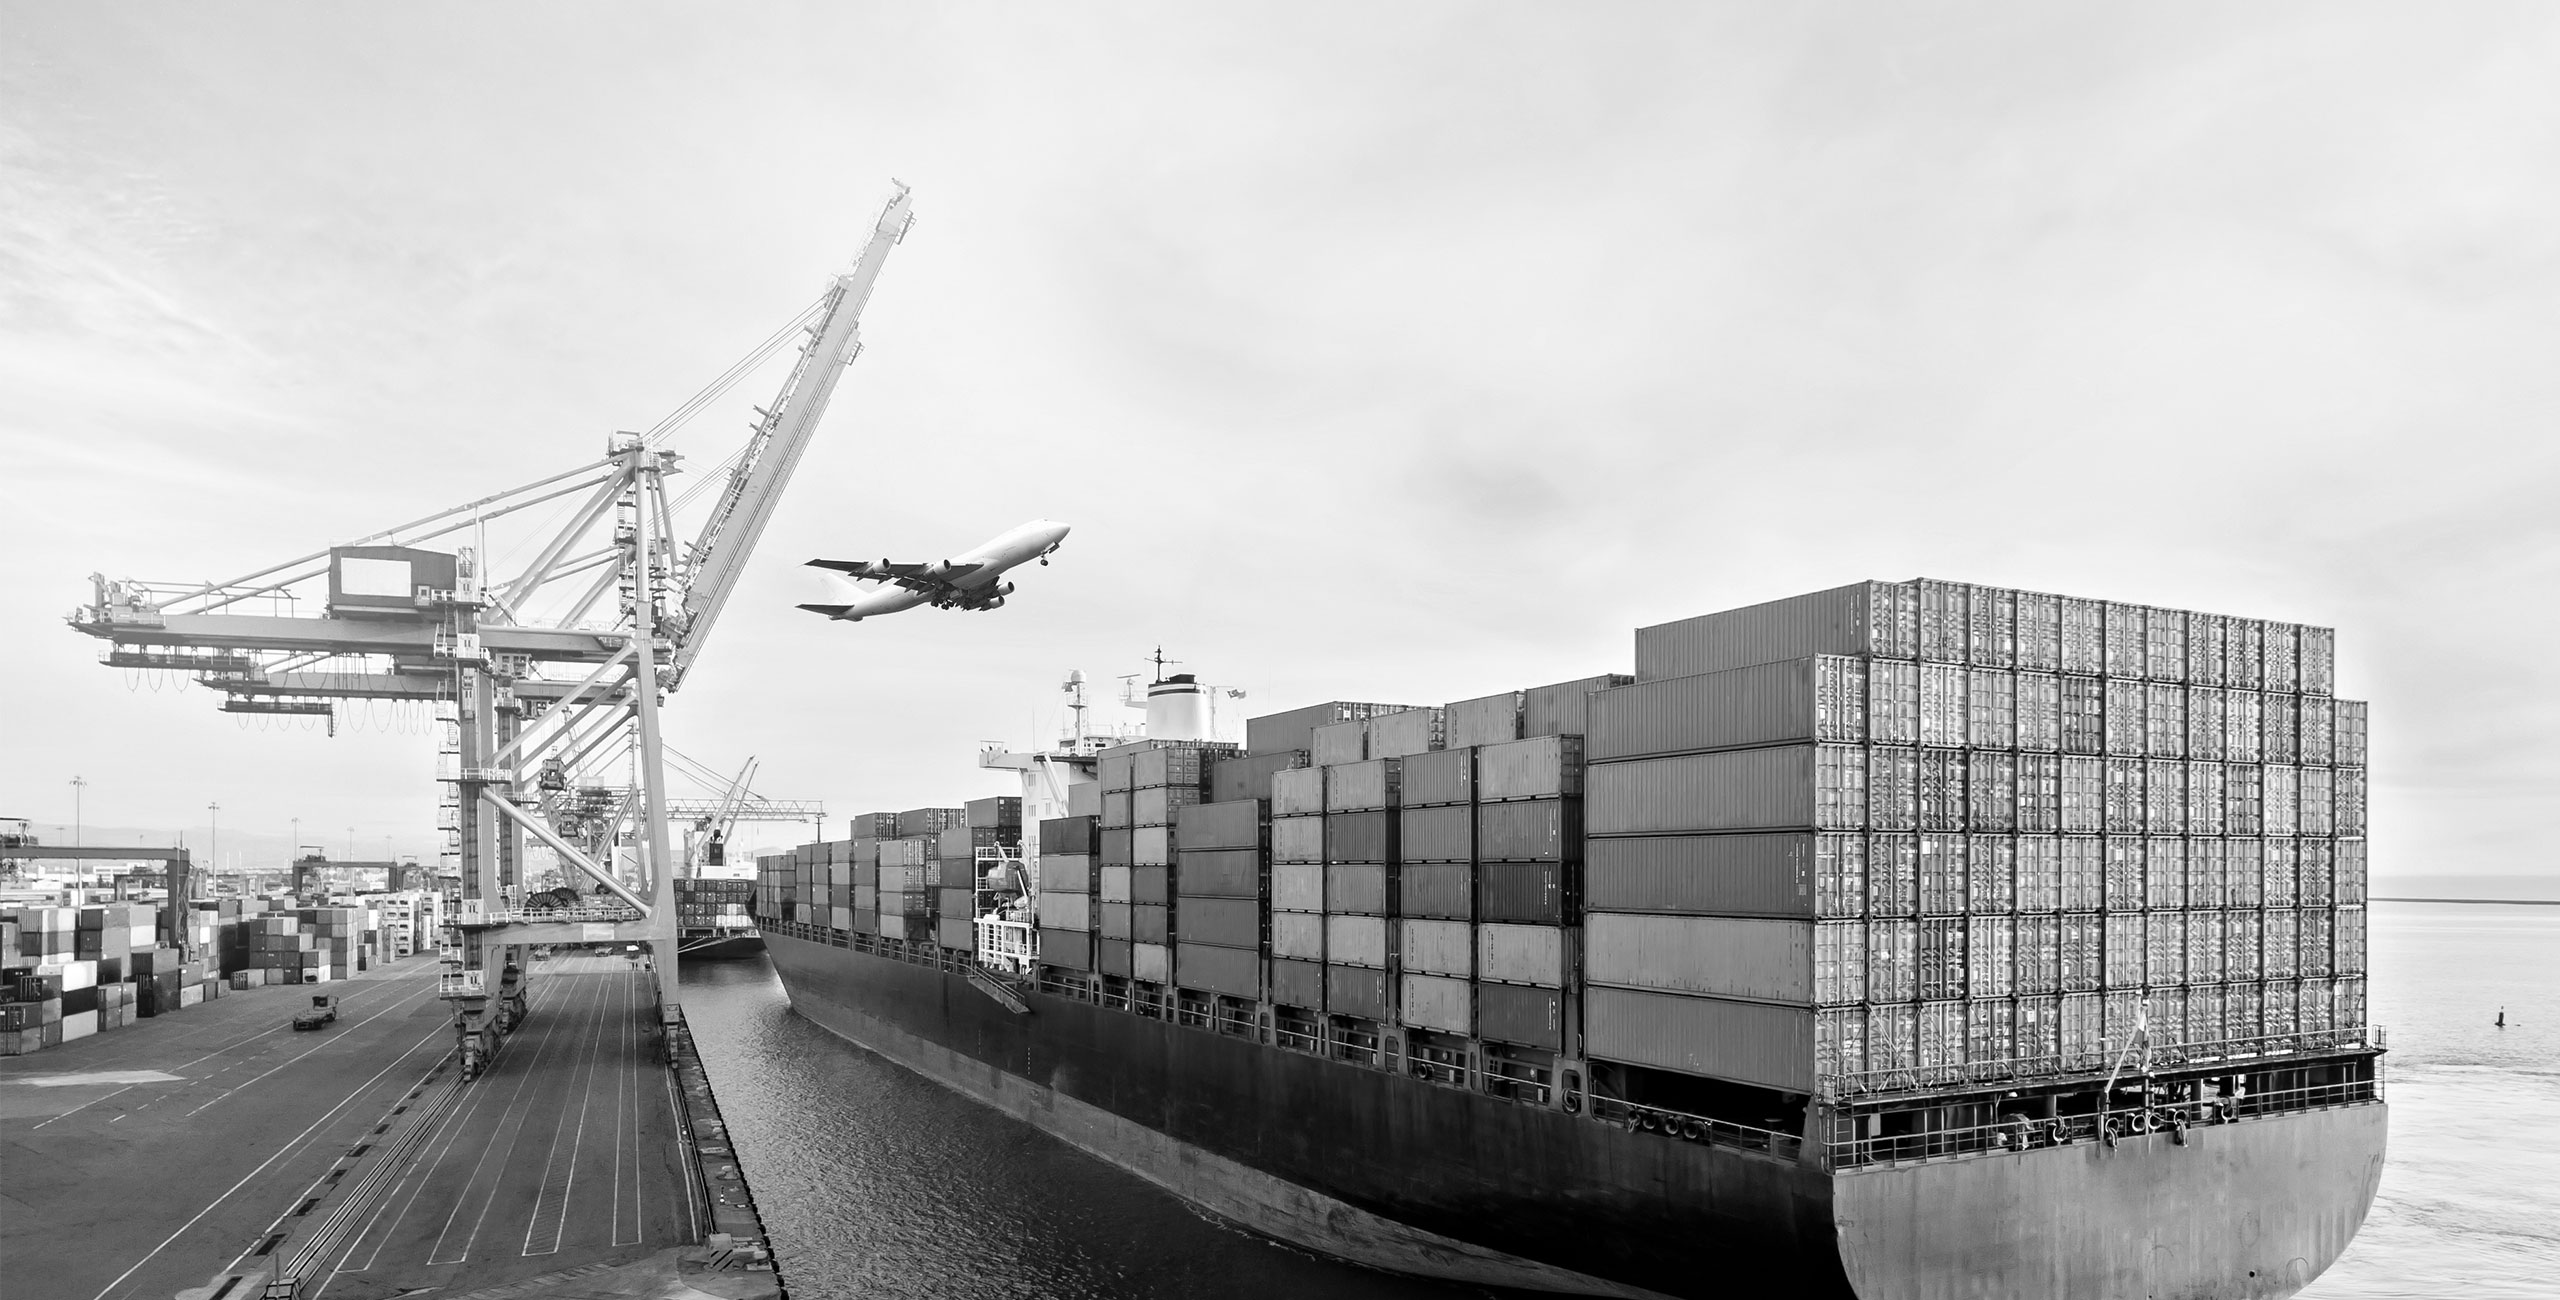 Cargo ships in port filled with containers, freight cranes and an airplane flying over.